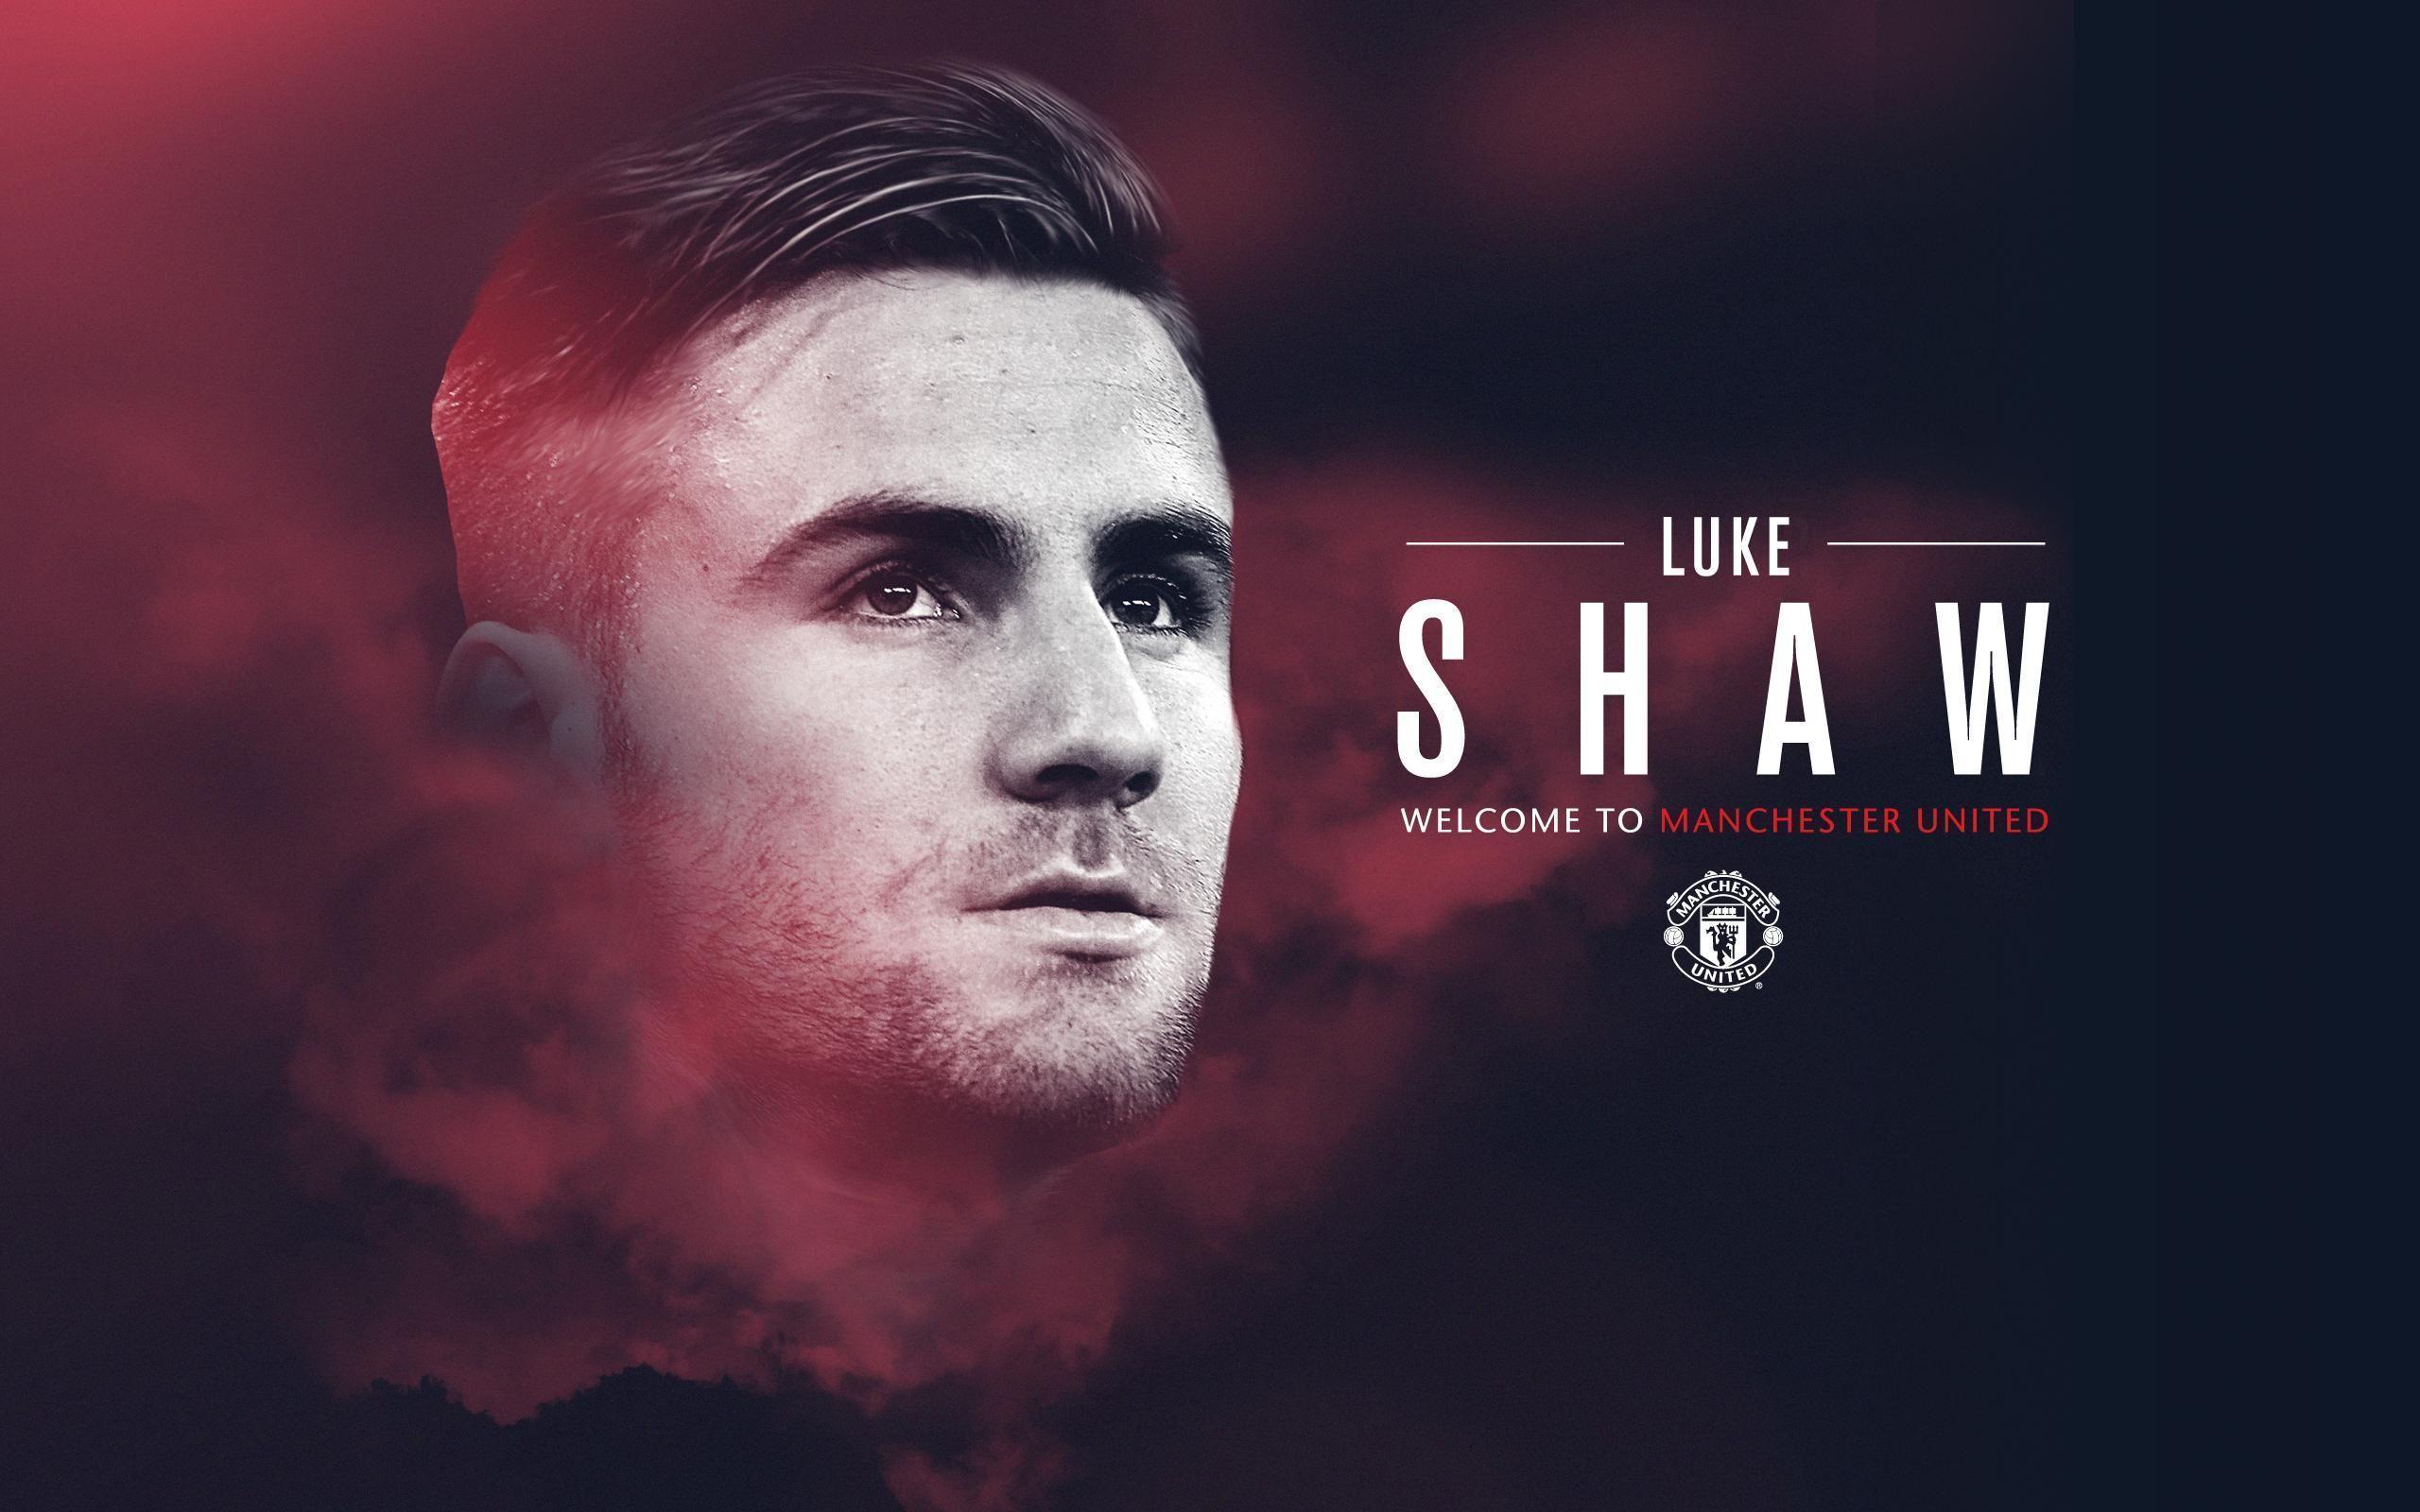 Luke Shaw Welcome To Manchester United